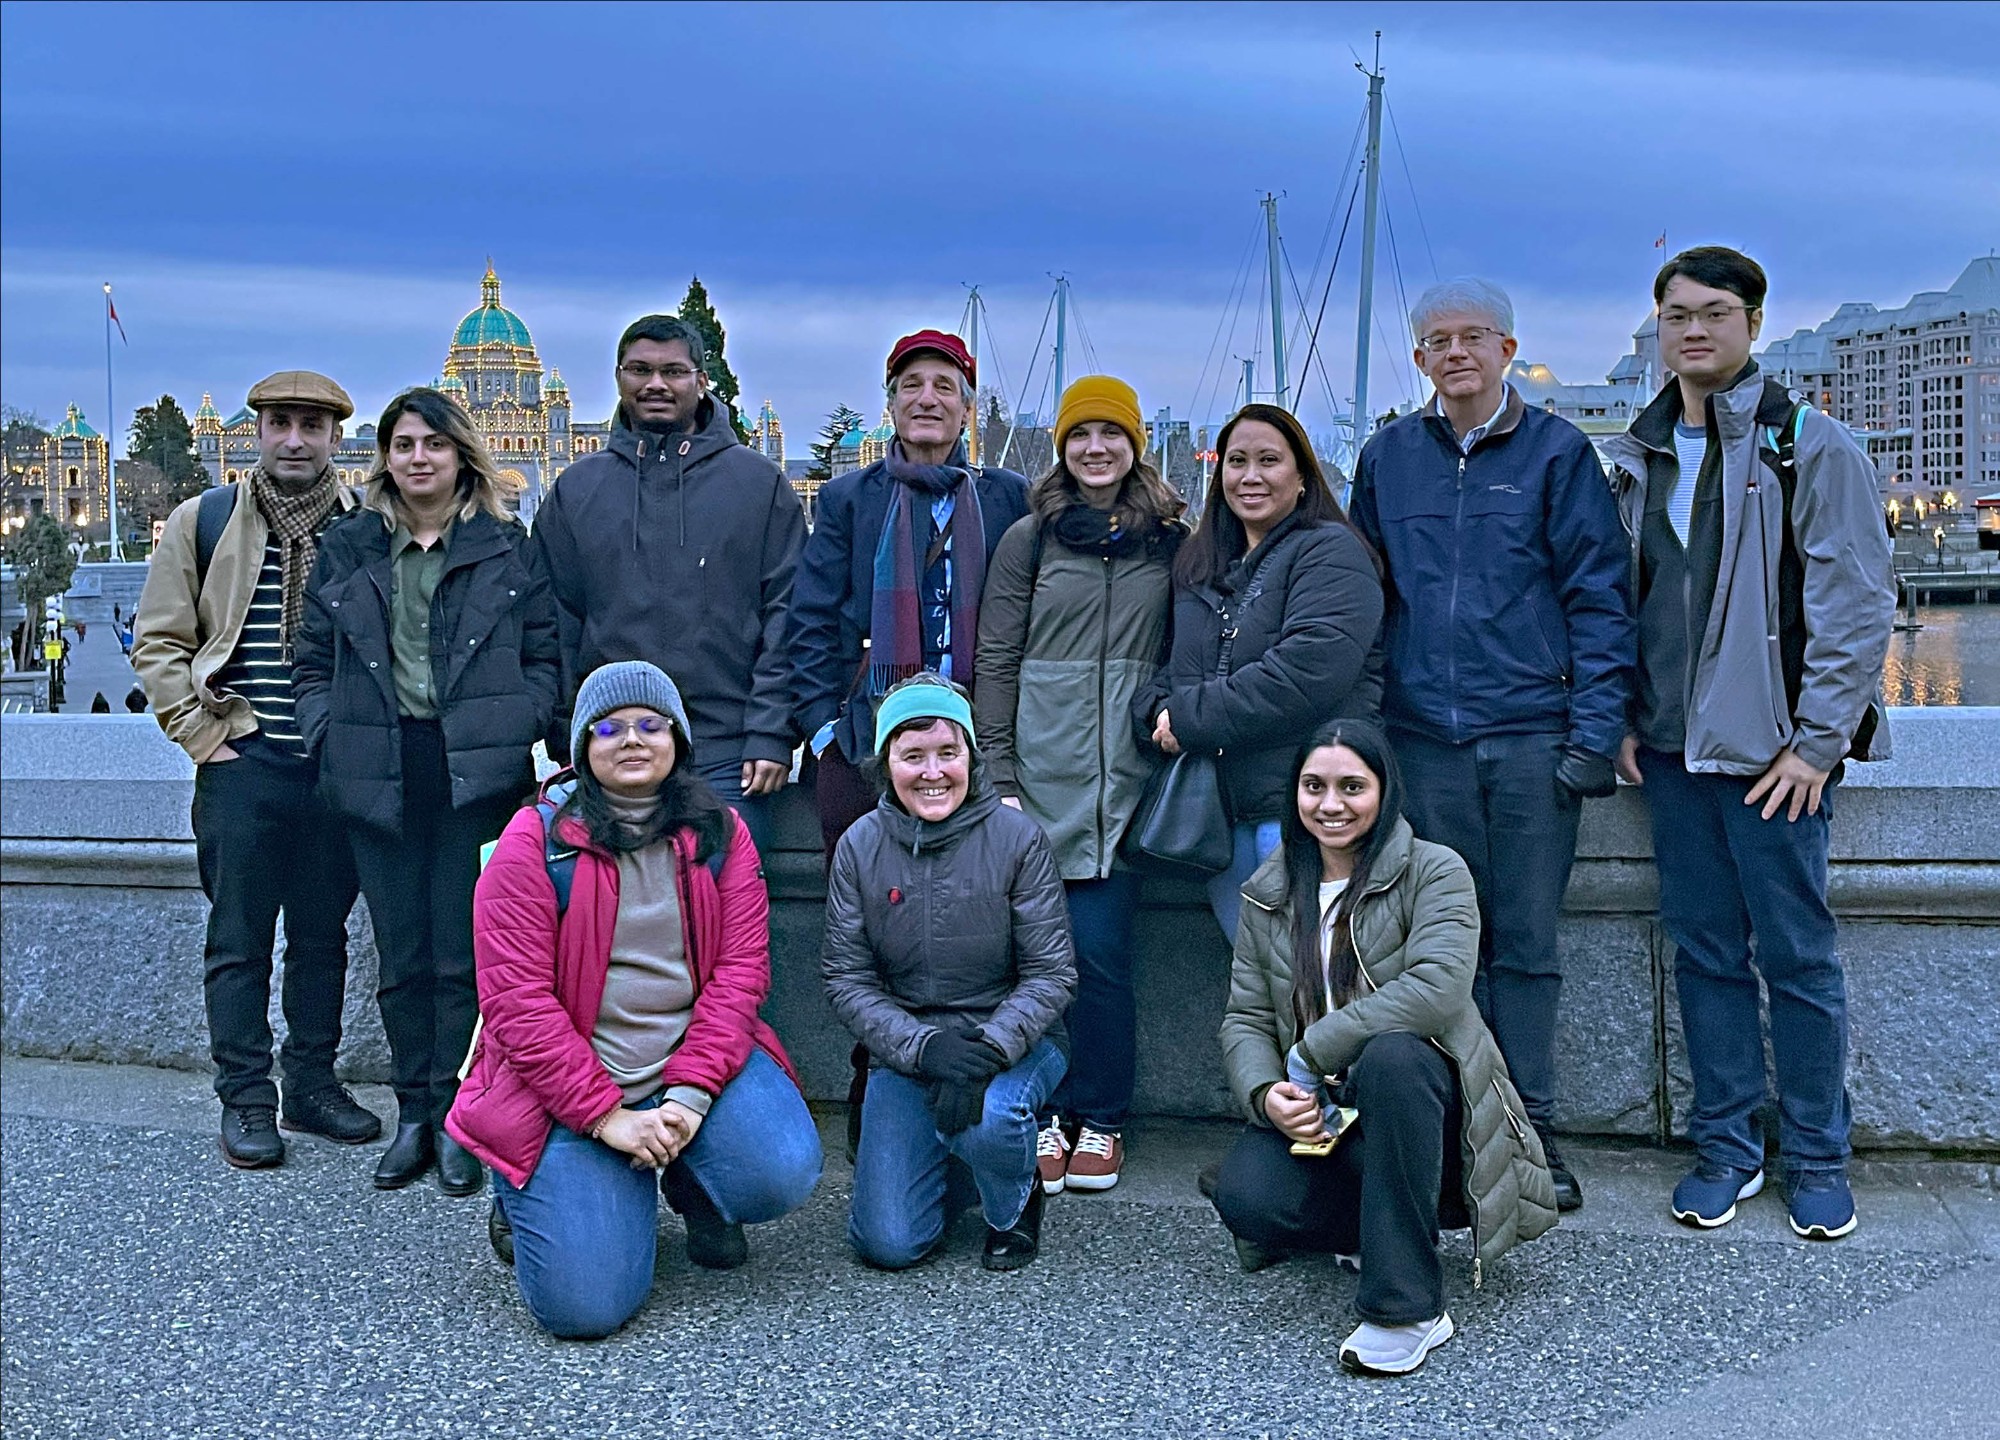 Urban studies students and faculty in Victoria, British Columbia